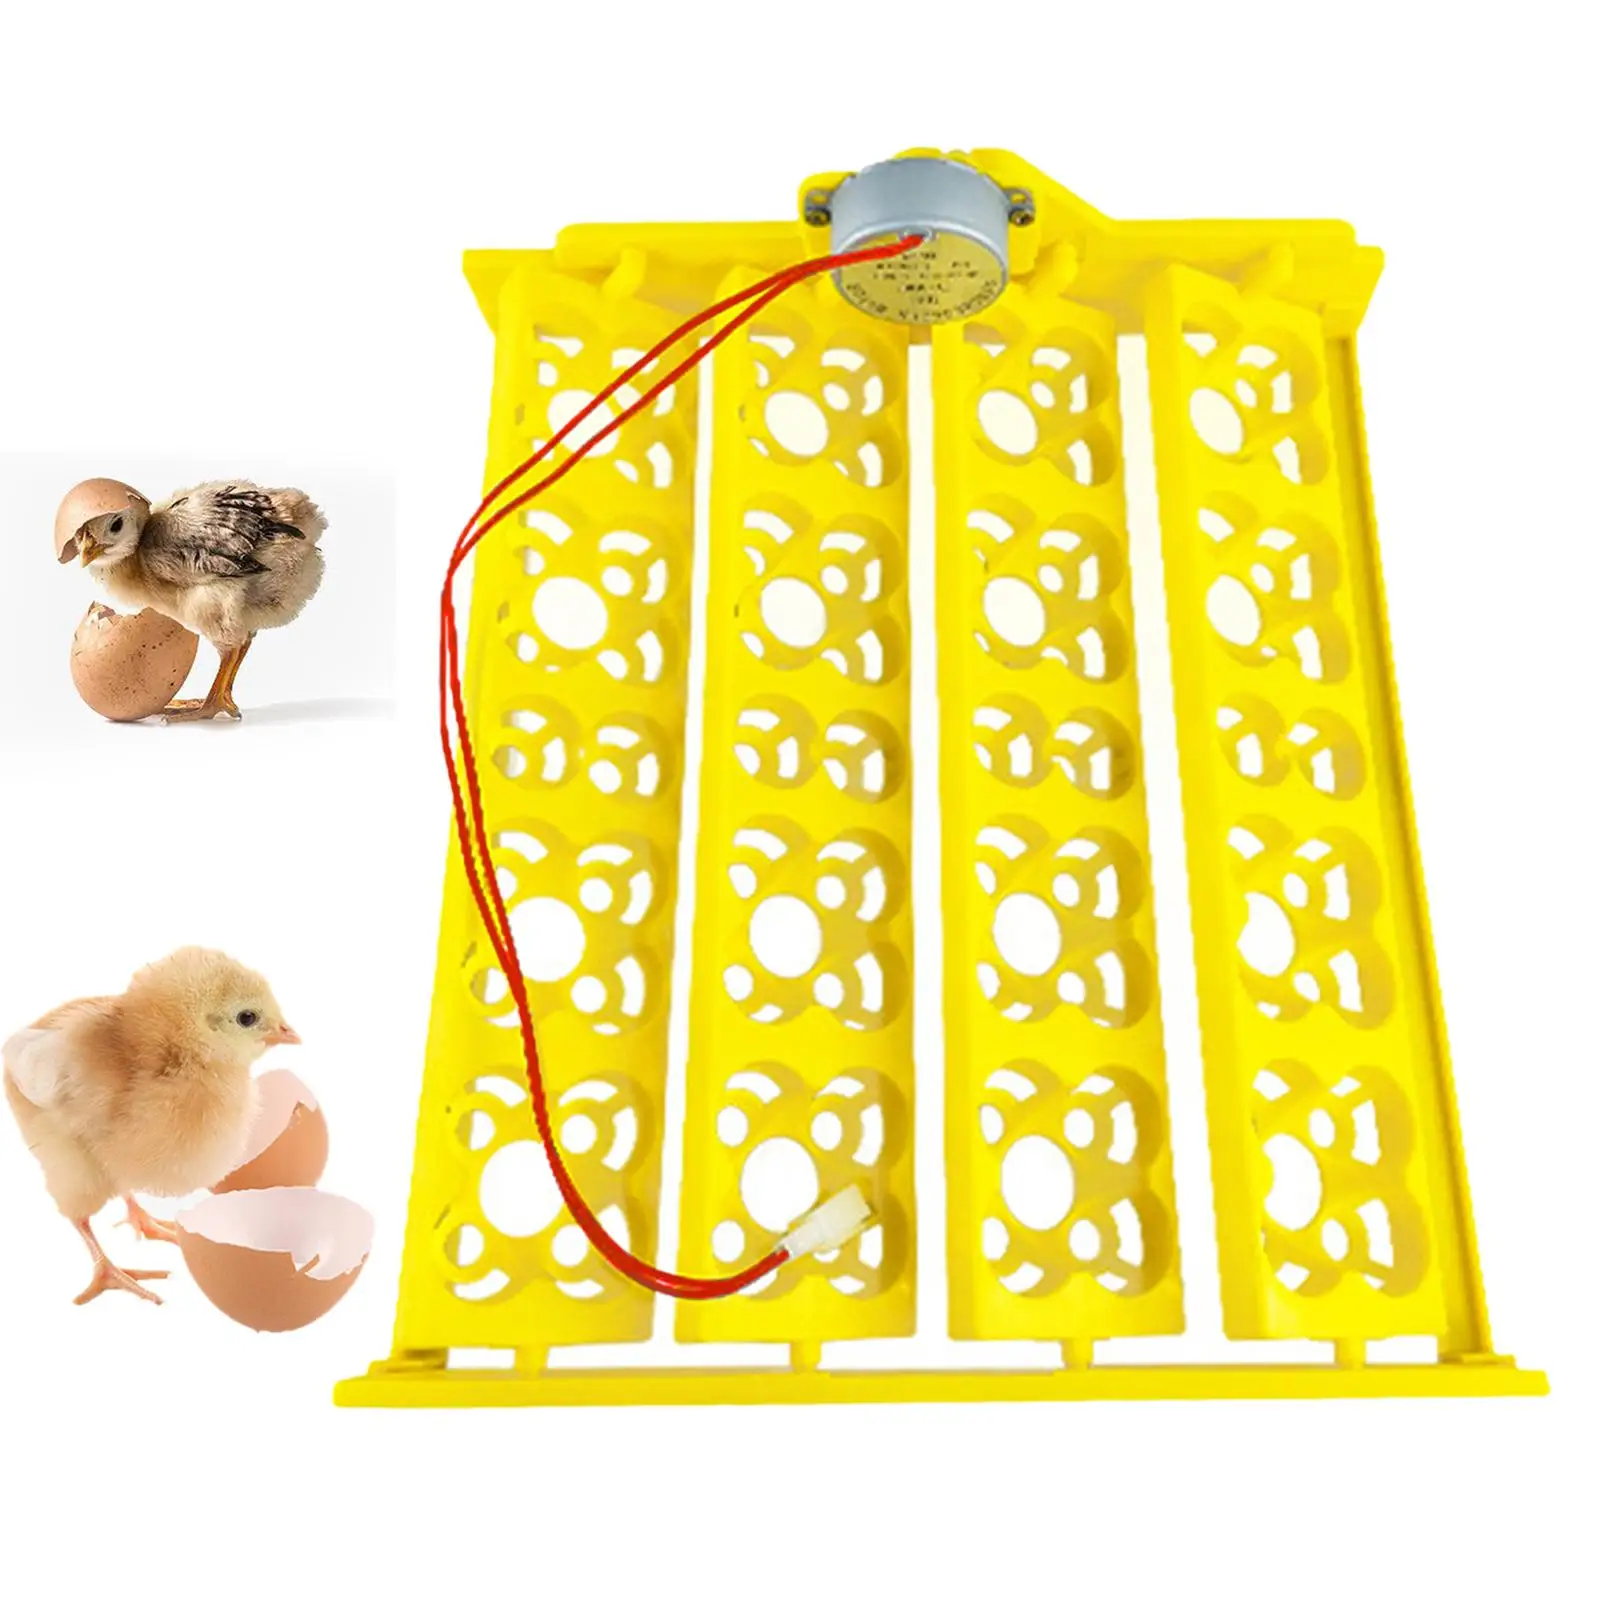 Automatic Egg Incubator Tray Automatic Egg Turner Turning Tray Egg Hatcher Accessories Poultry Automatic Turning Motor for Duck